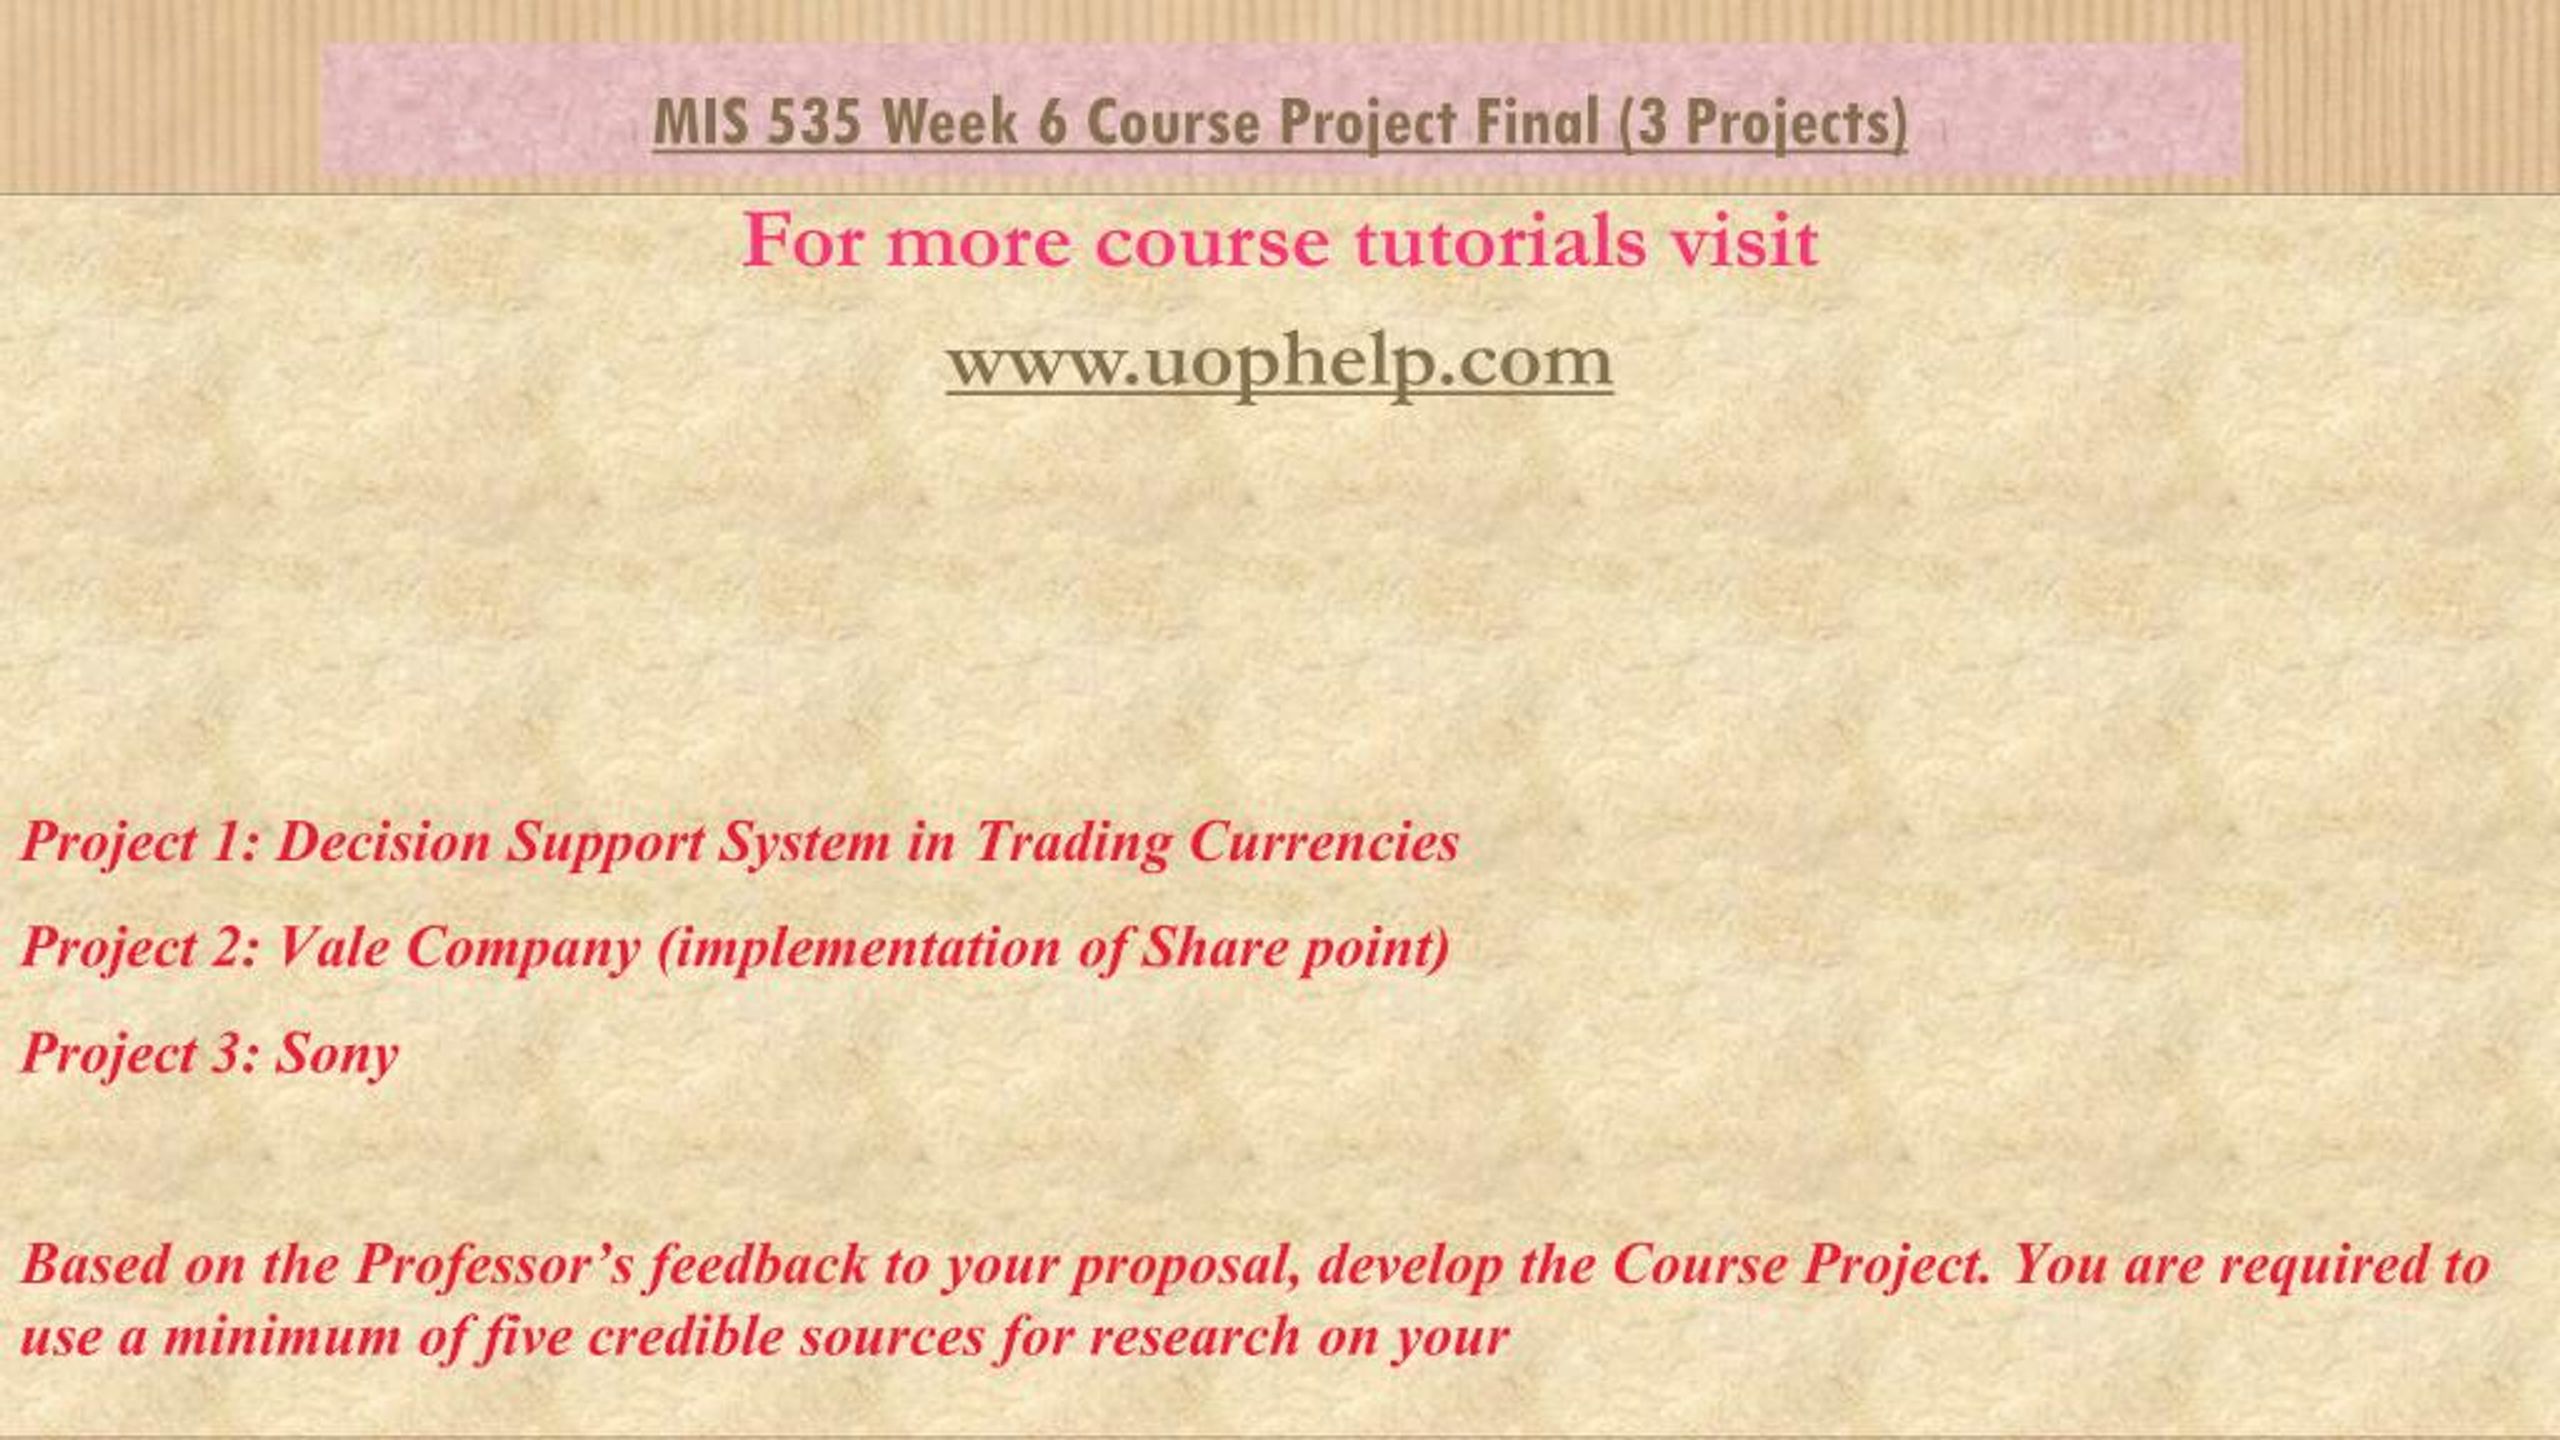 MIS 535 Course Project